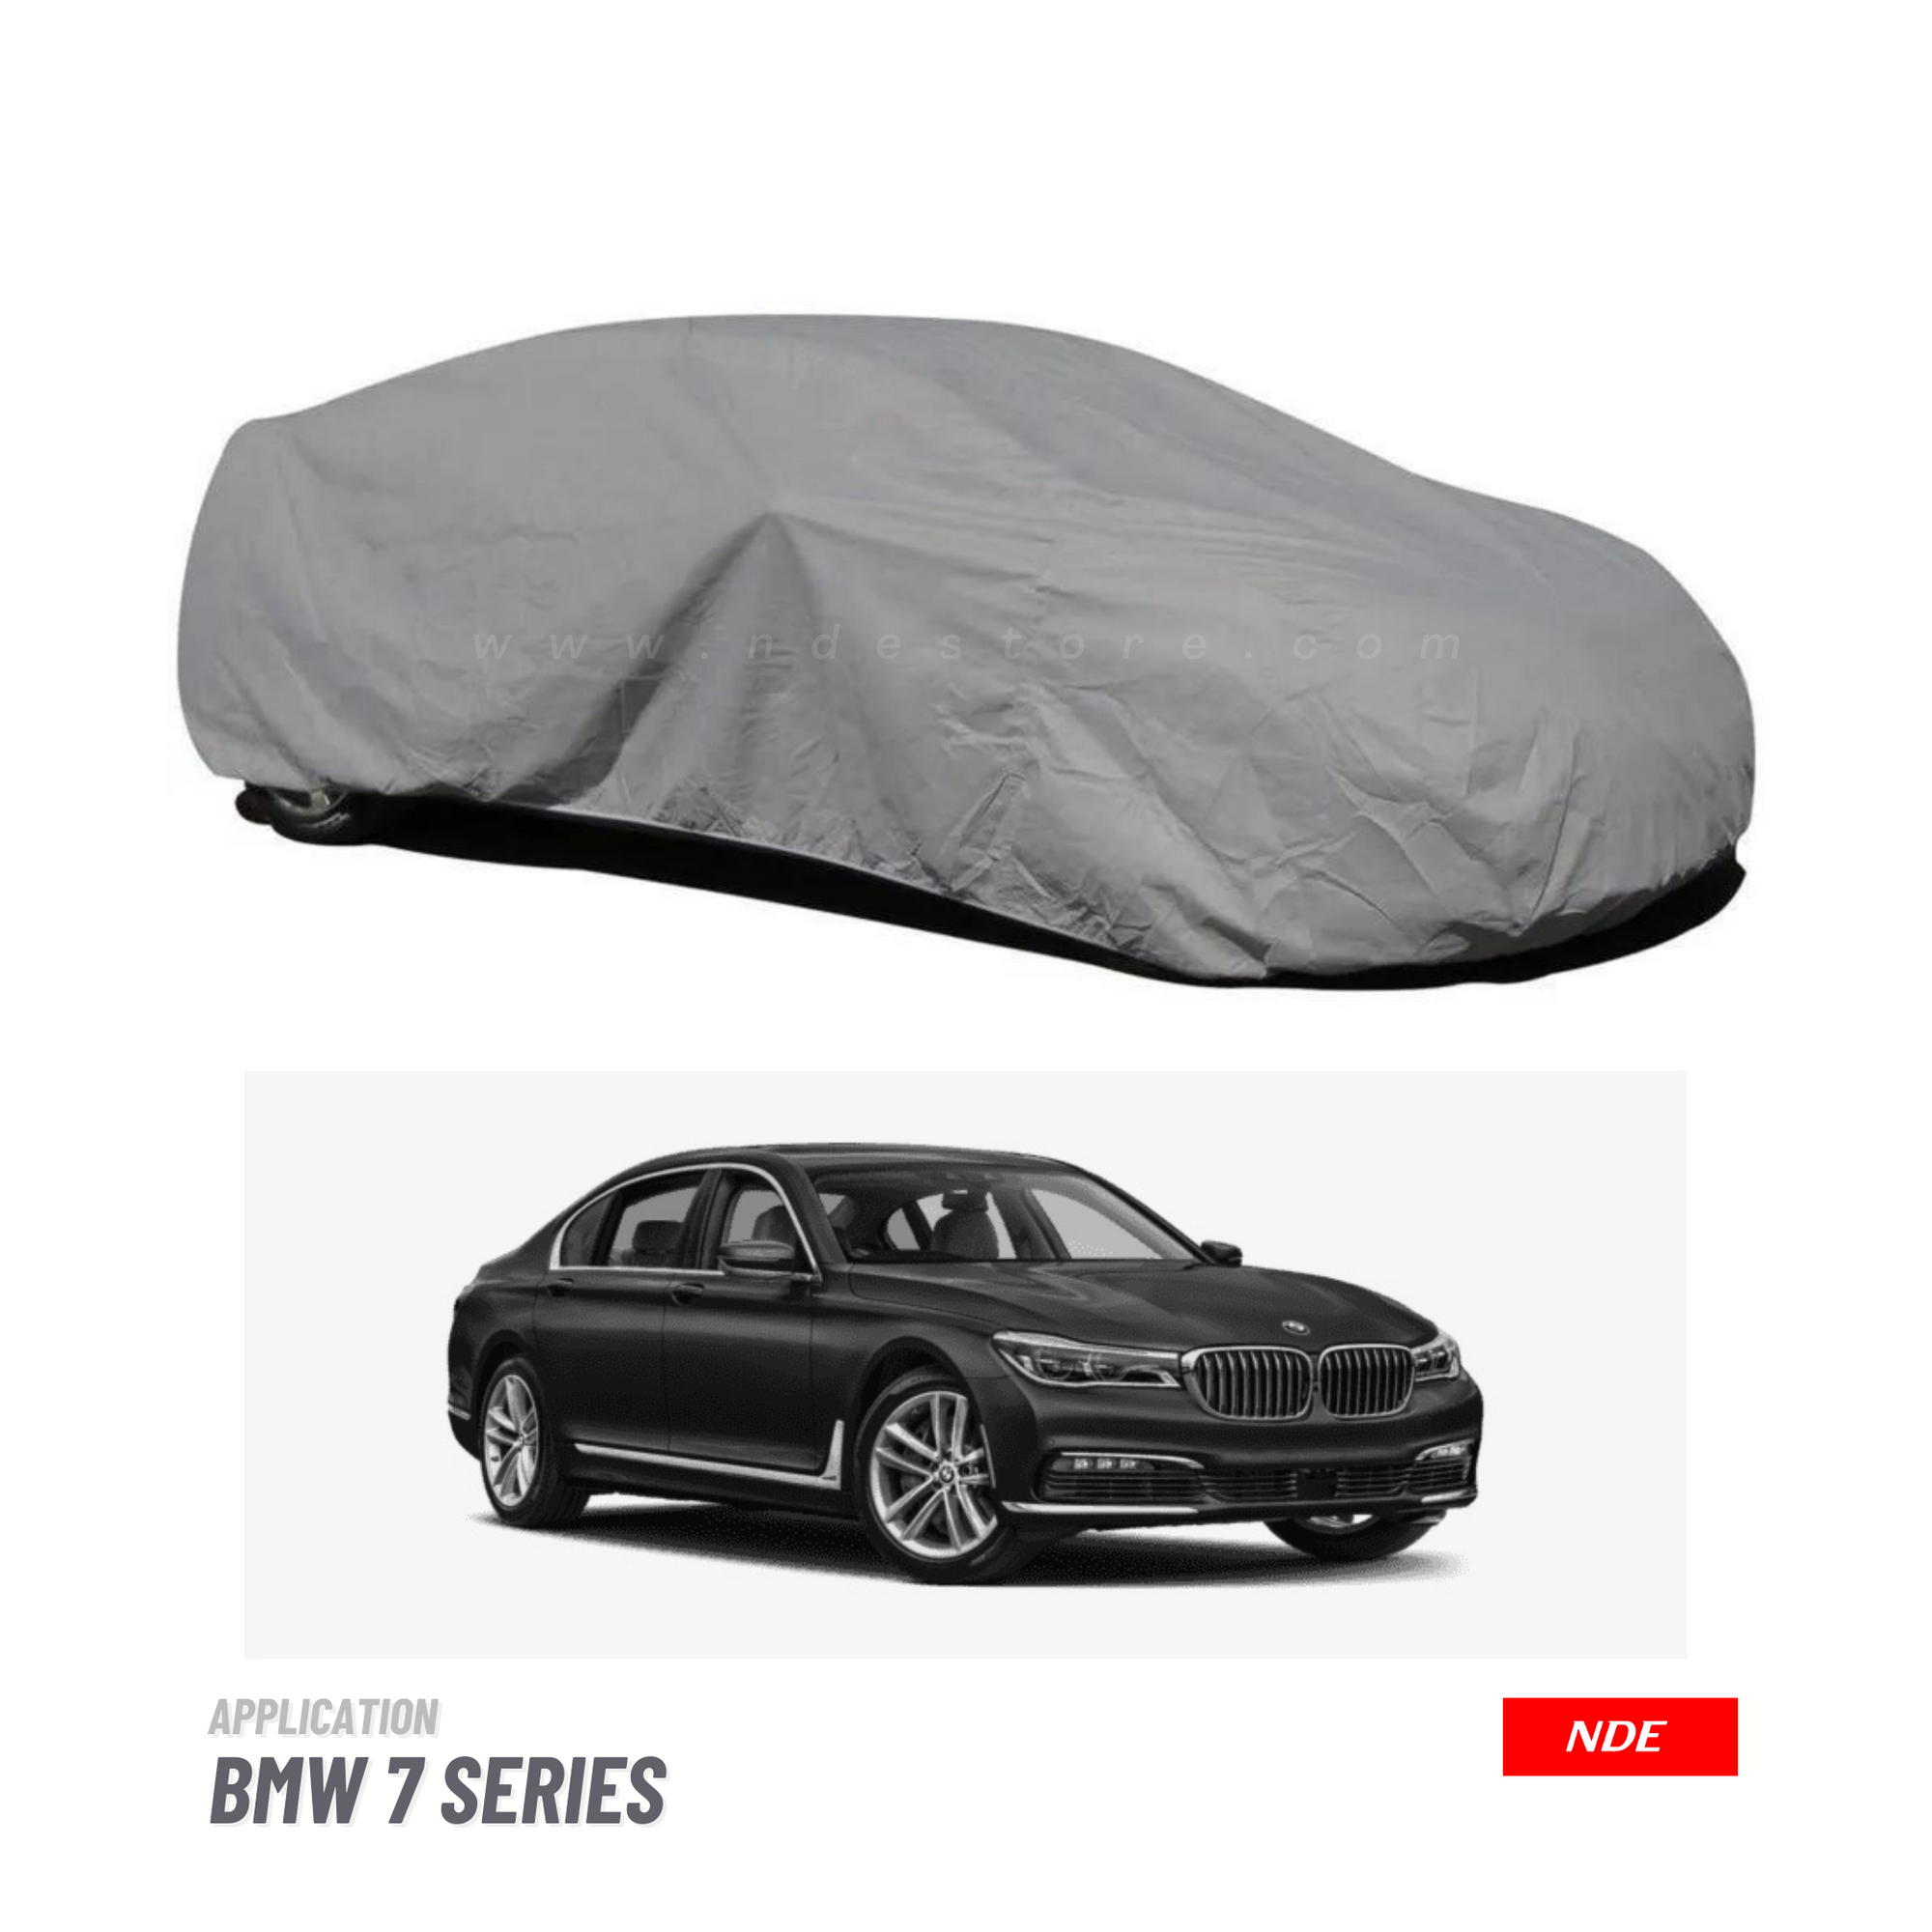 TOP COVER WITH FLEECE IMPORTED FOR BMW 7 SERIES